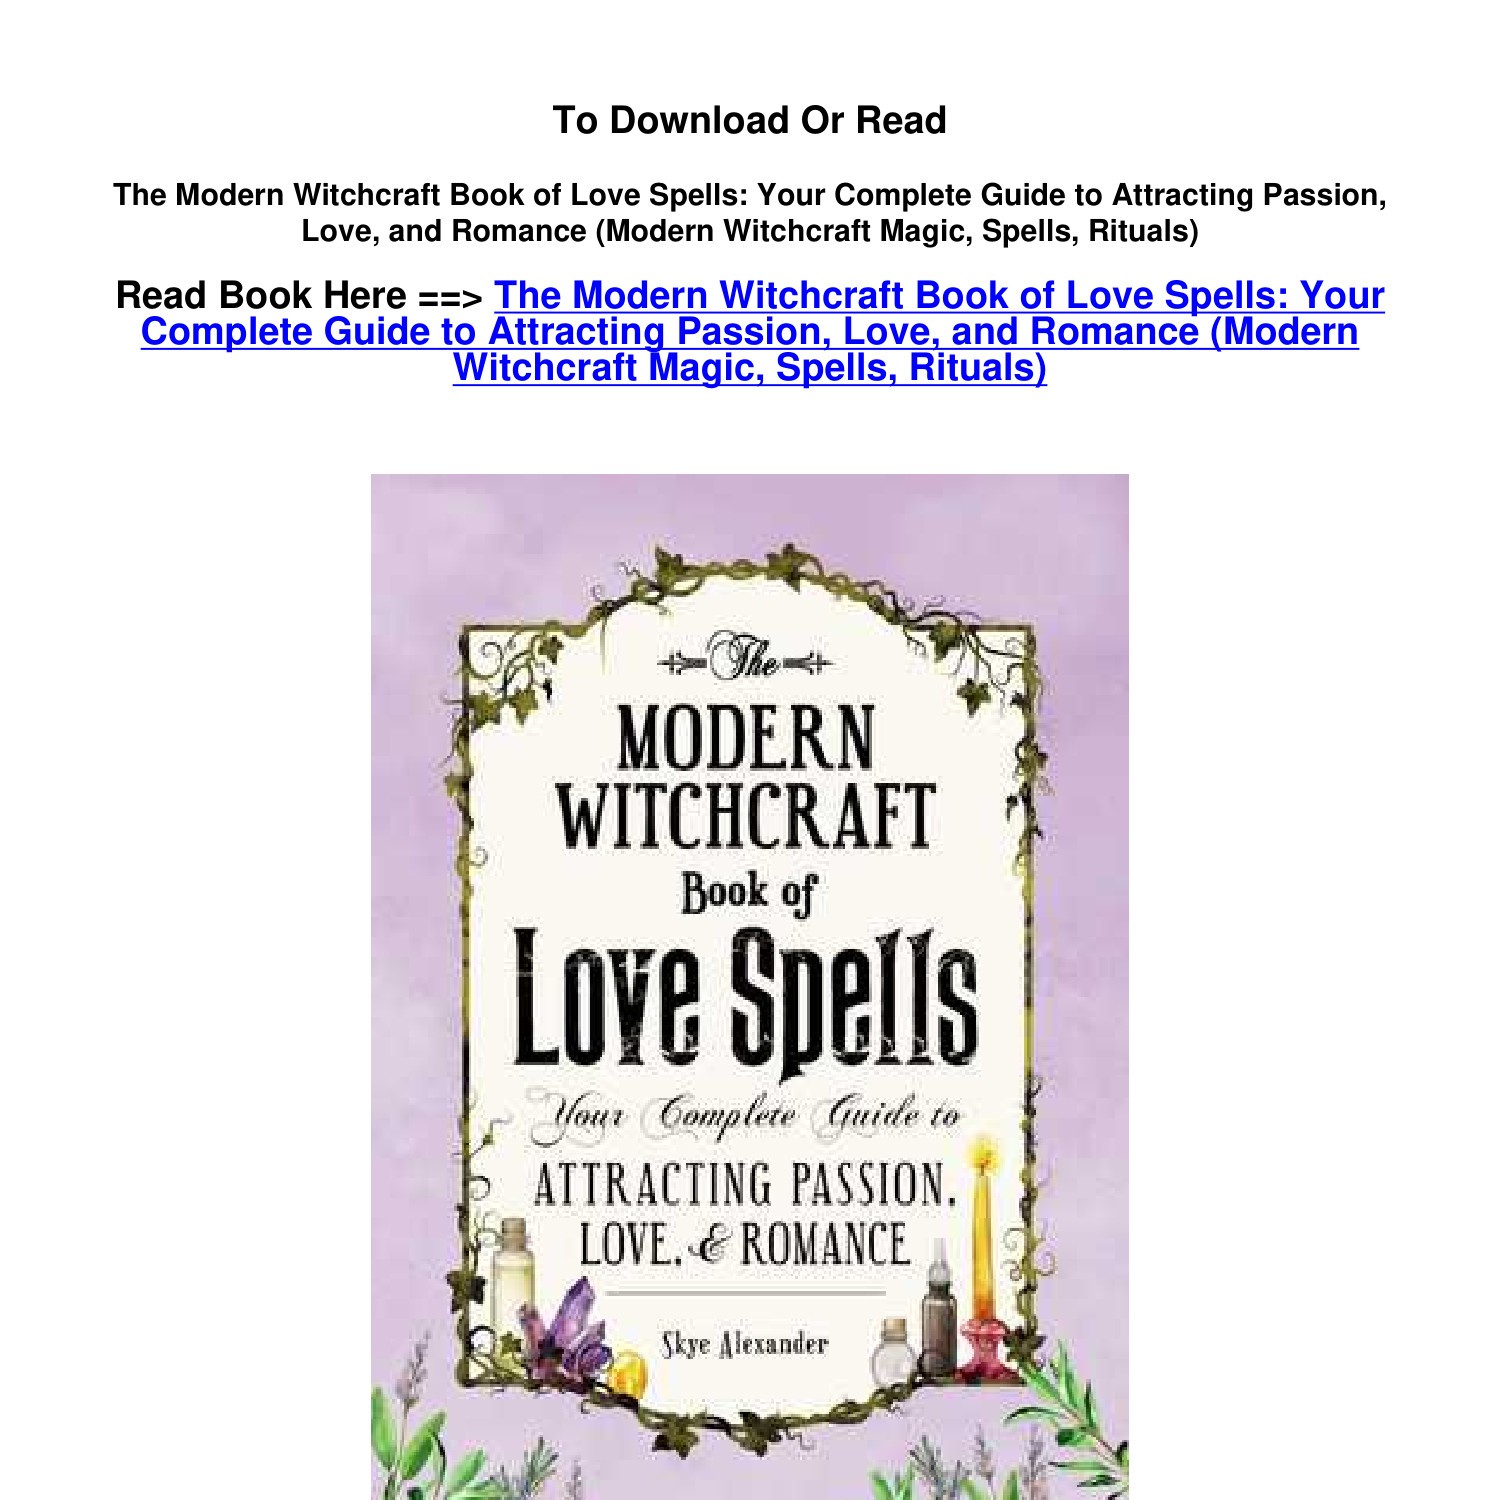 The Modern Witchcraft Book of Love Spells, Book by Skye Alexander, Official Publisher Page